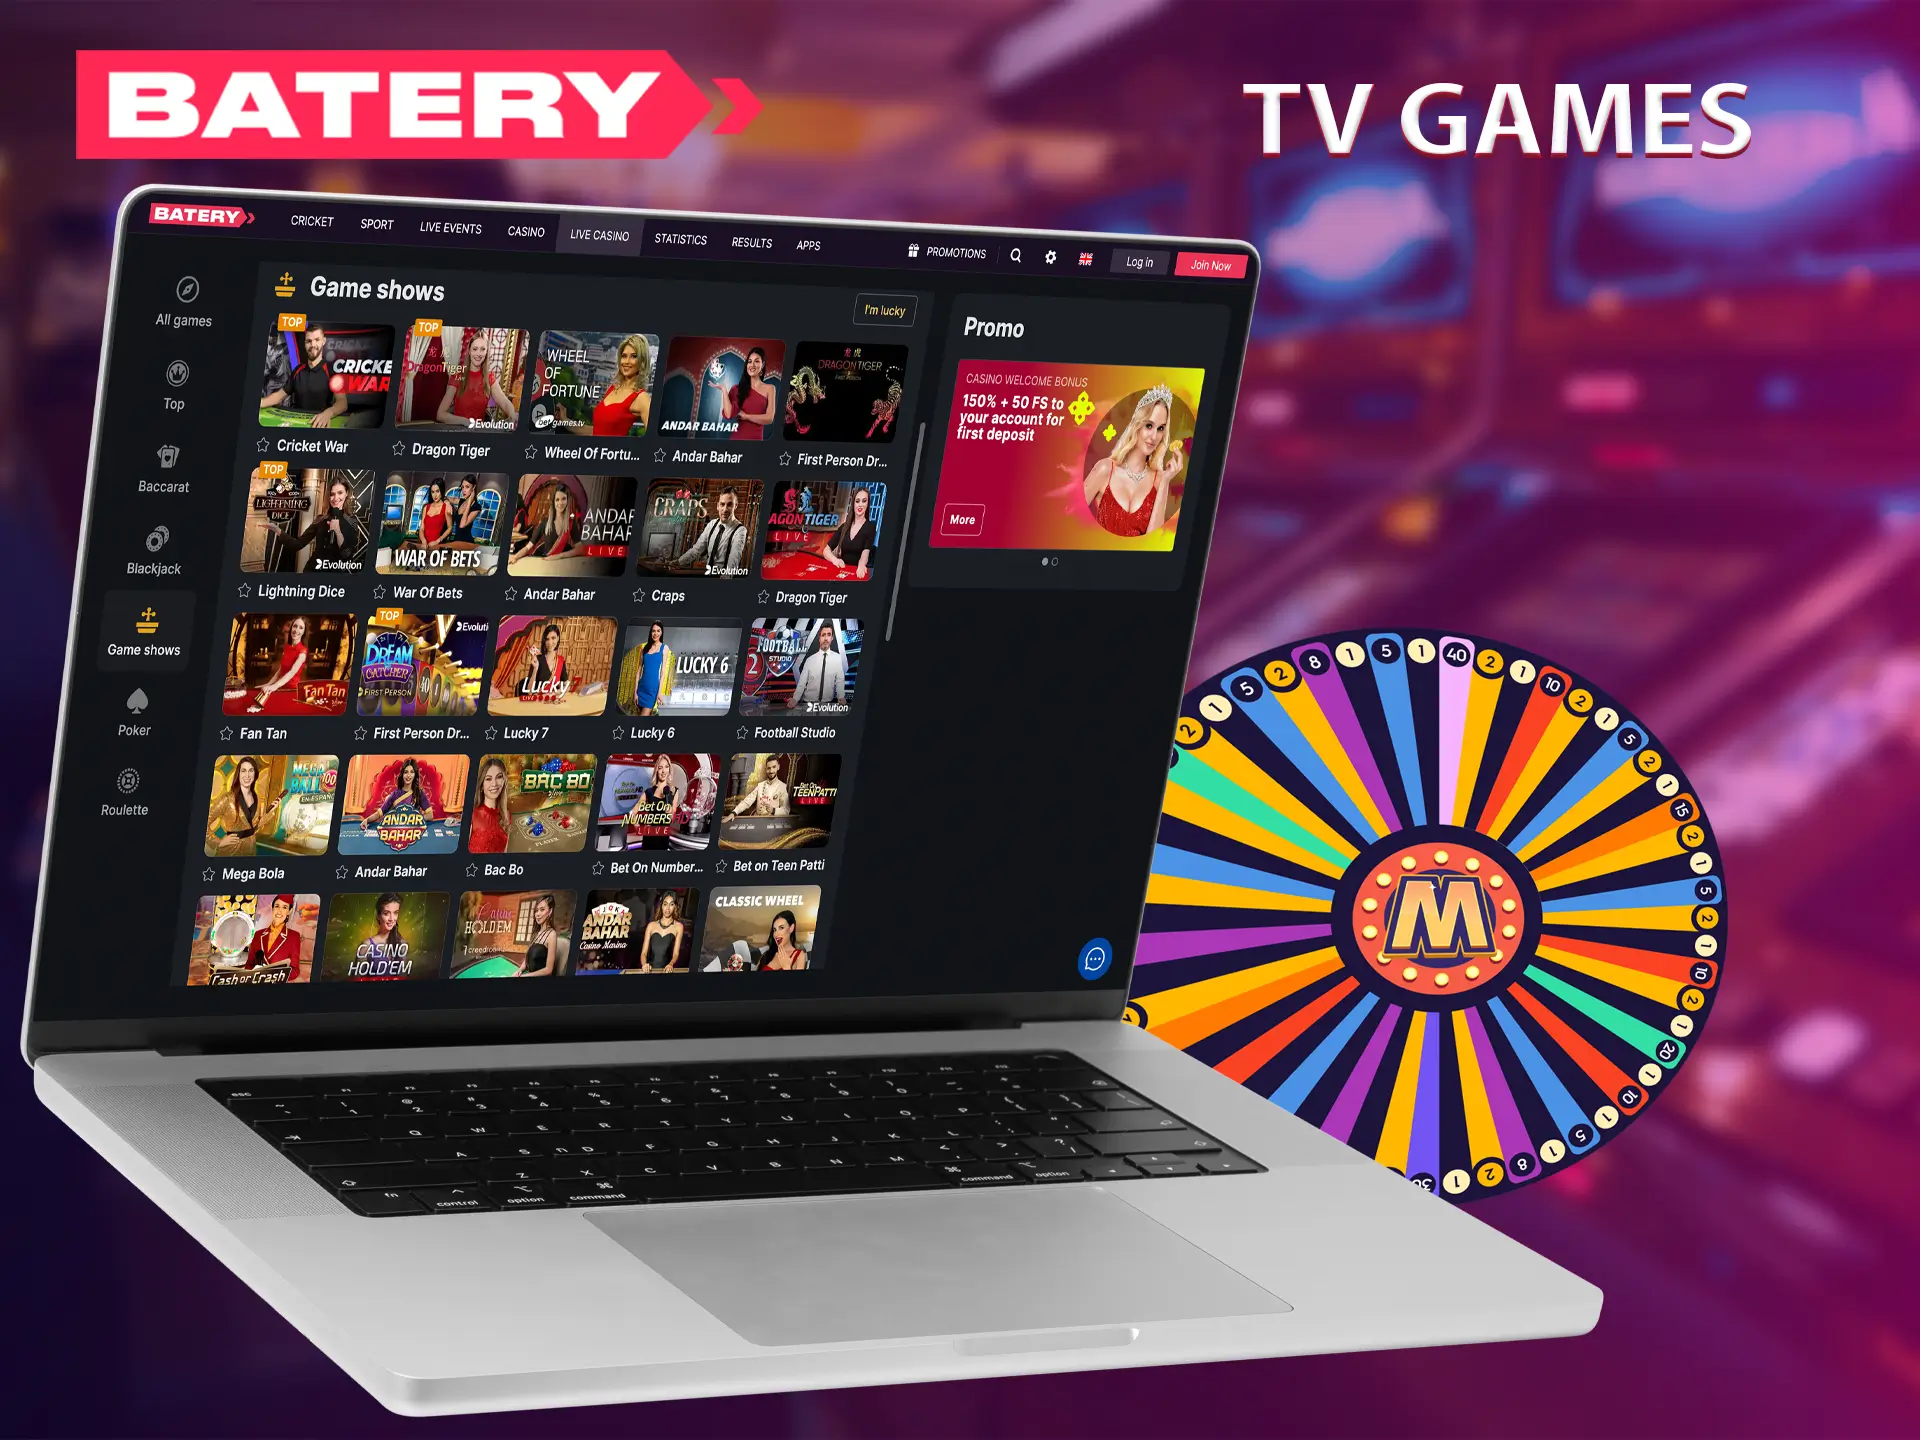 Batery casino TV games allow the player to enjoy their winnings live.